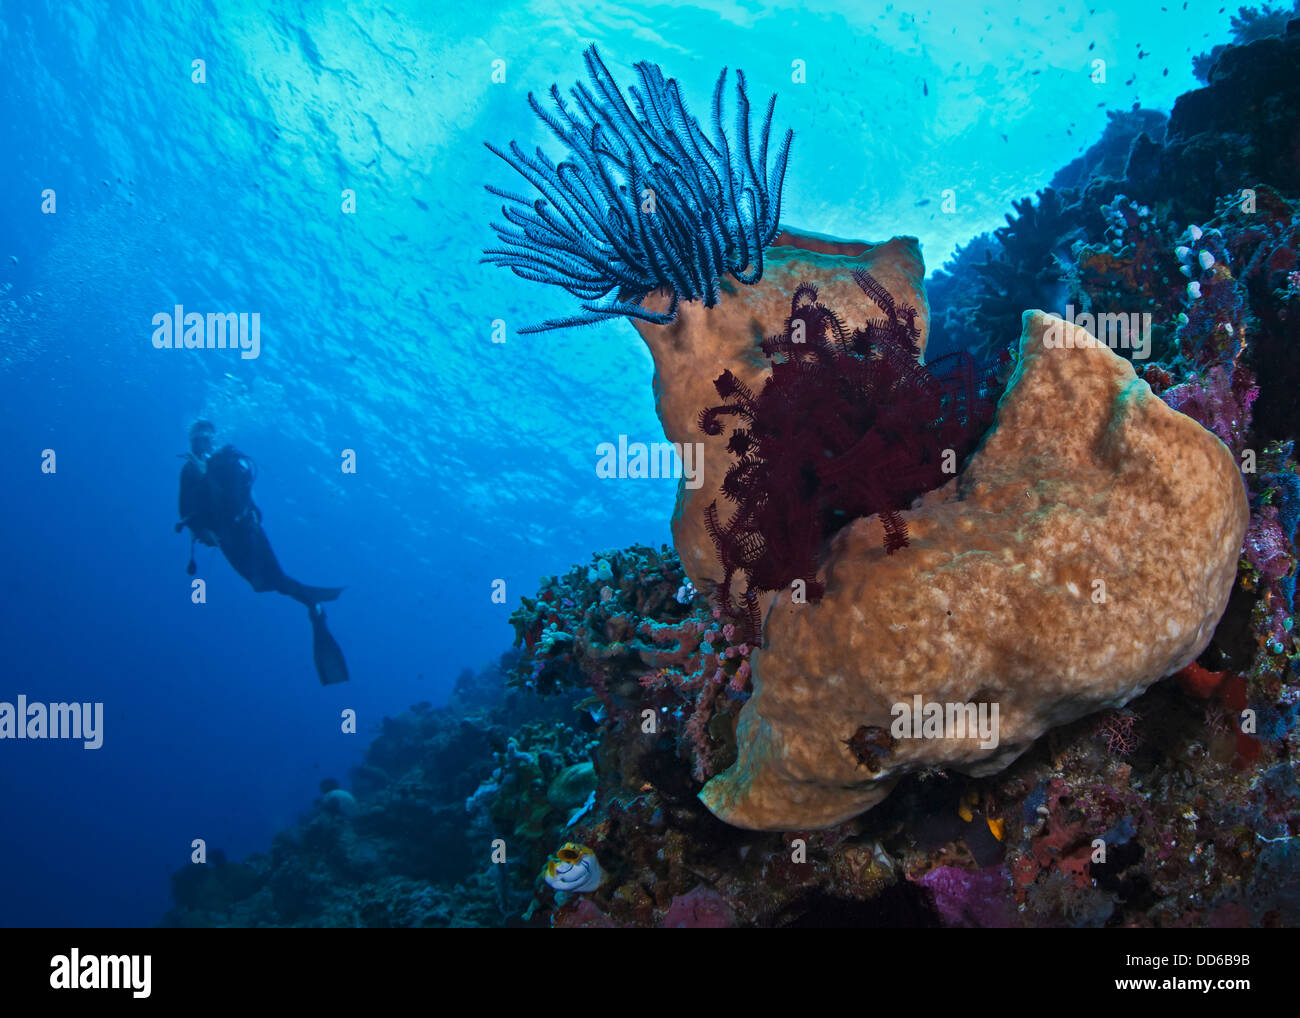 Close-focus wide angle view of crinoids on sponge with scuba diver silhouette in blue water. Stock Photo